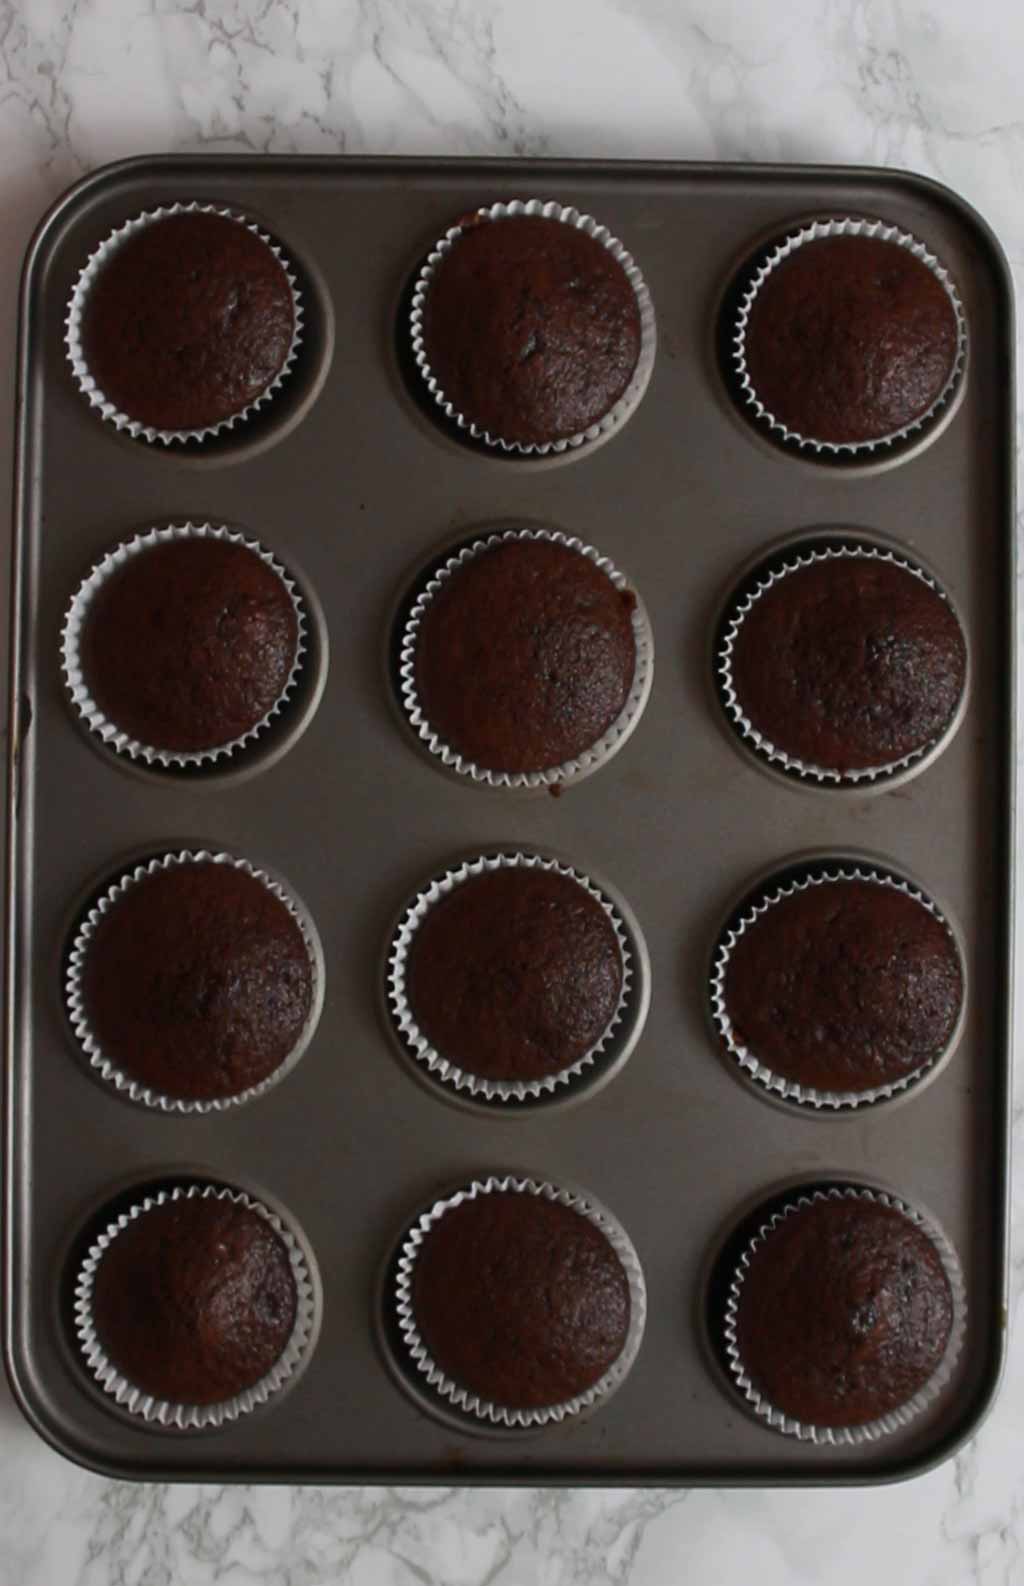 Baked Cupcakes In The Tray